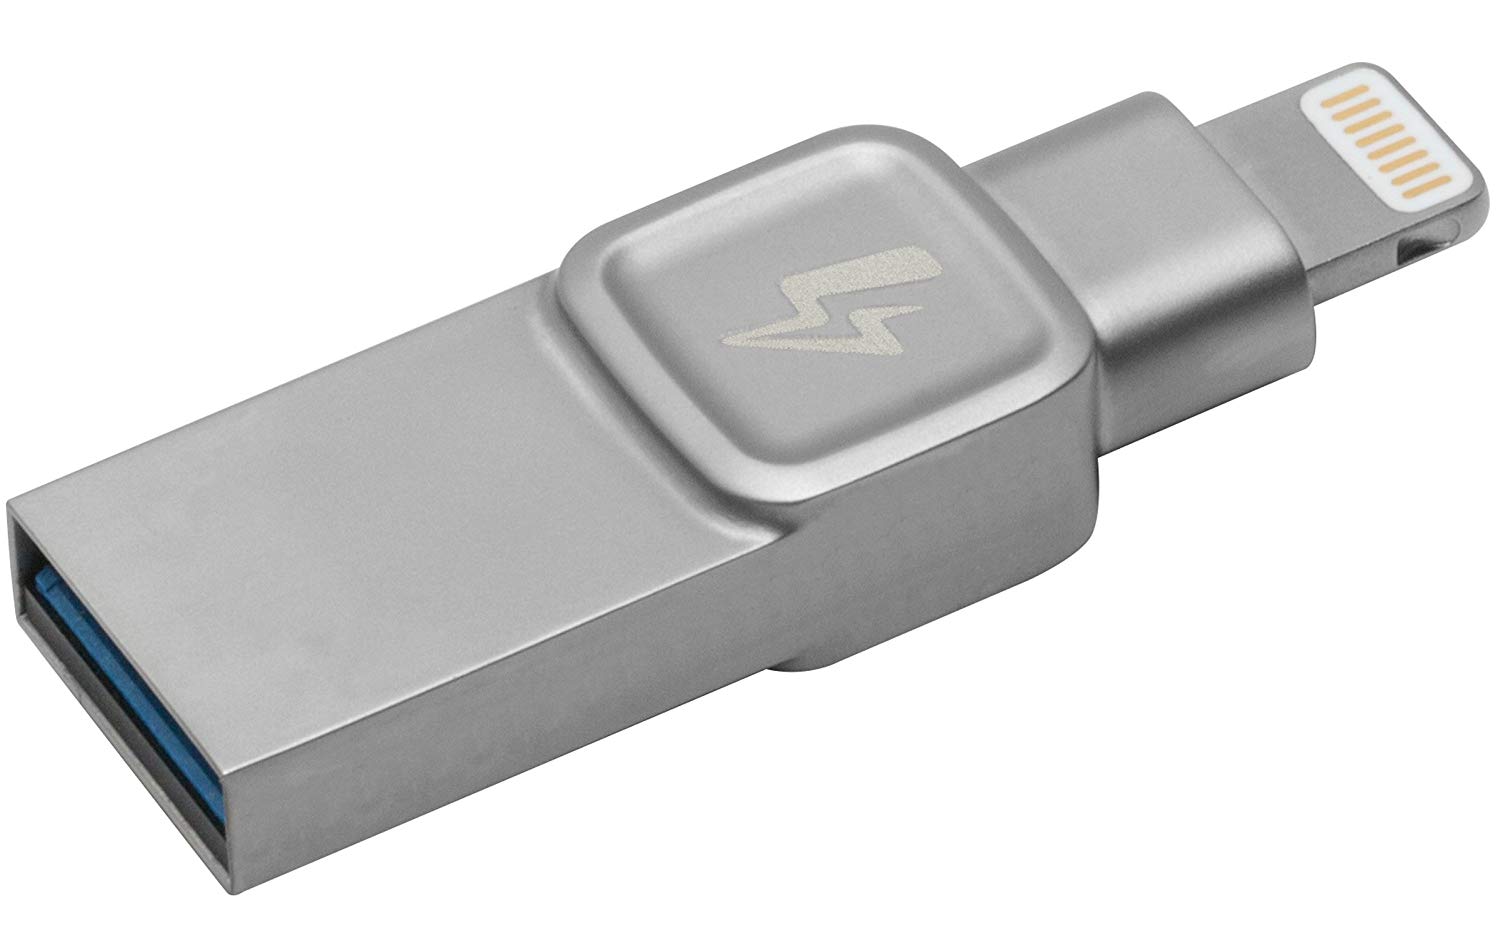 Kingston Bolt USB 3.0 Flash drive Memory Stick for Apple iPhone & iPads with iOS 9.0+, External Expandable Memory Storage, DataTraveler Bolt Duo, Take more photos & videos, 128GB – Silver